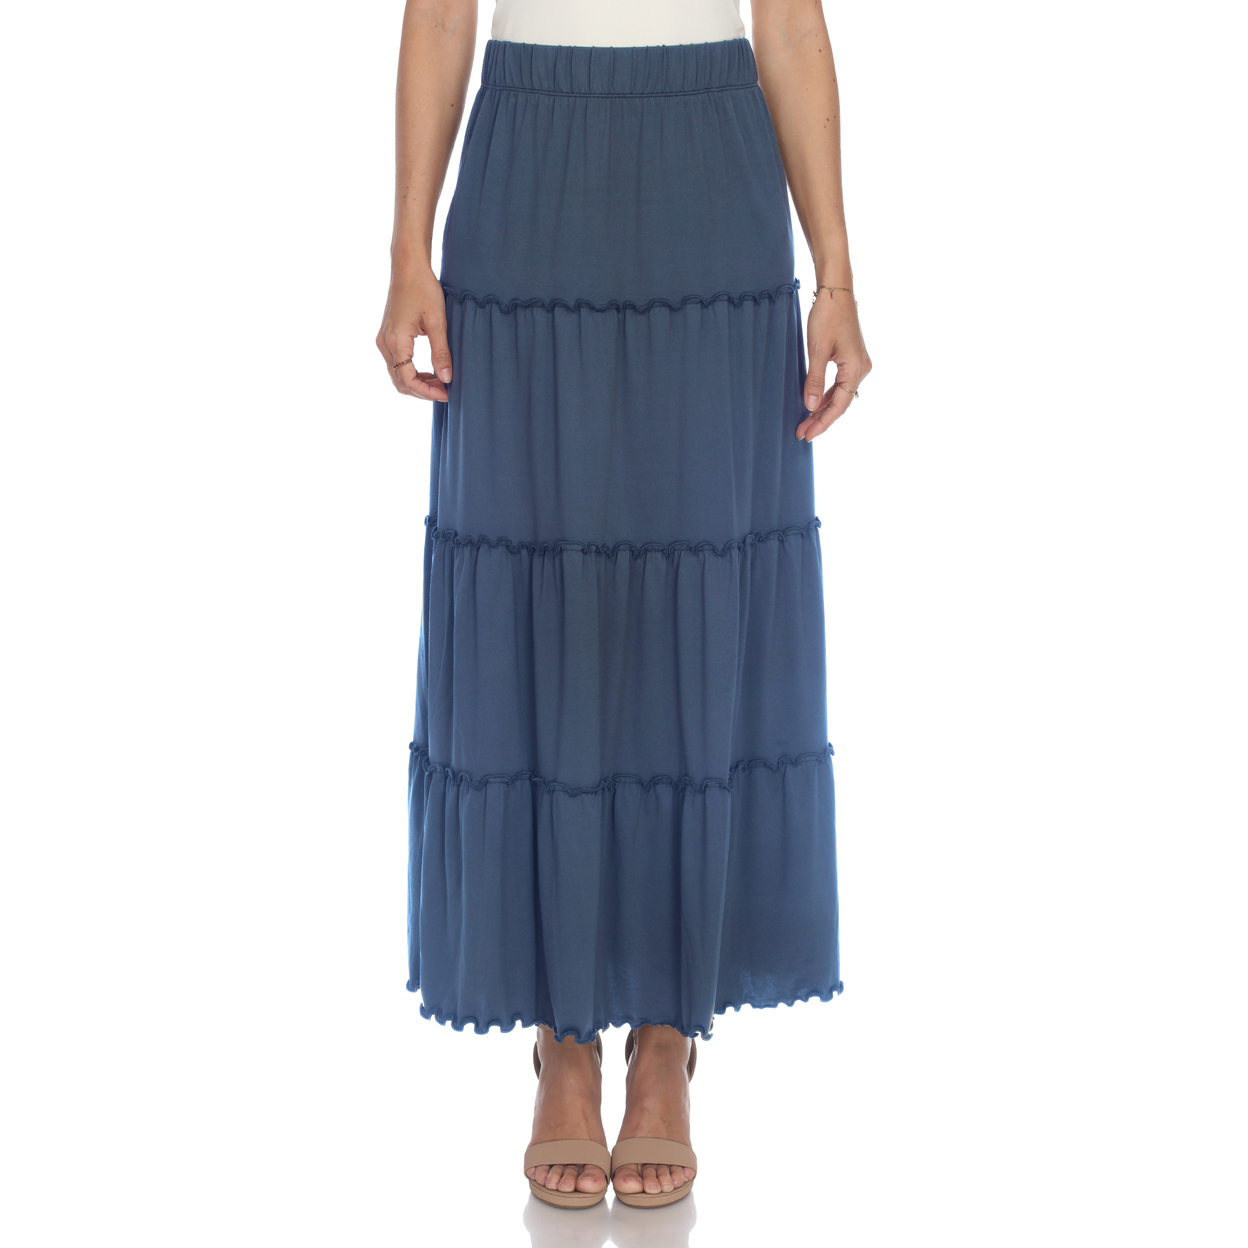 White Mark Women's Tiered Maxi Skirt With Pockets - Denim Blue, Small